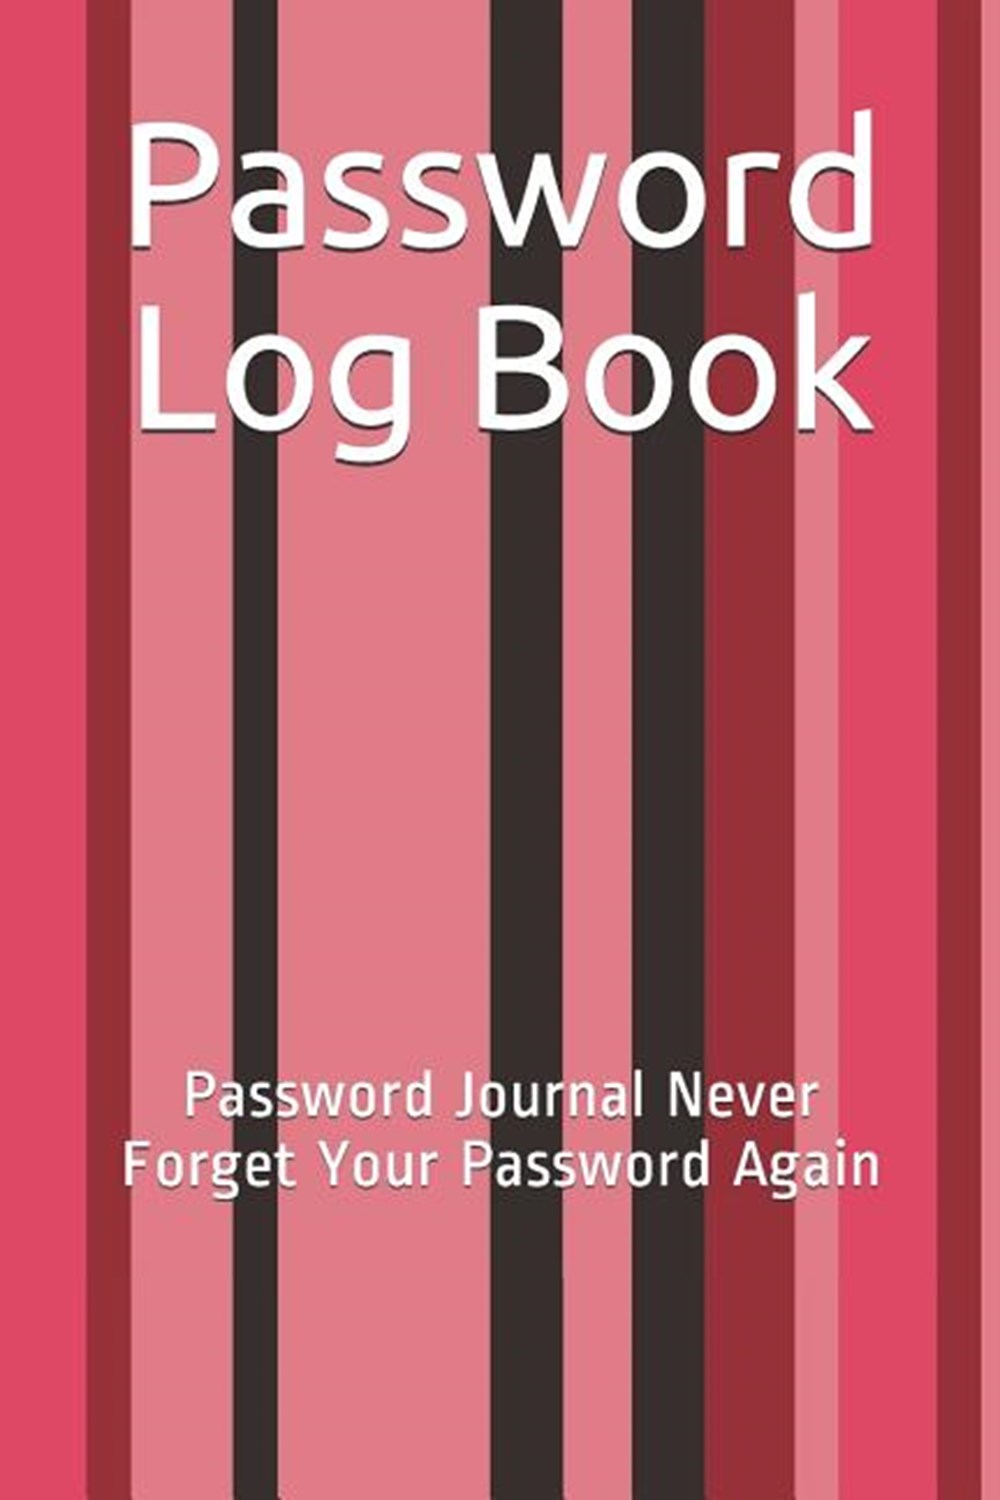 Password Log Book Password Journal Never Forget Your Password Again